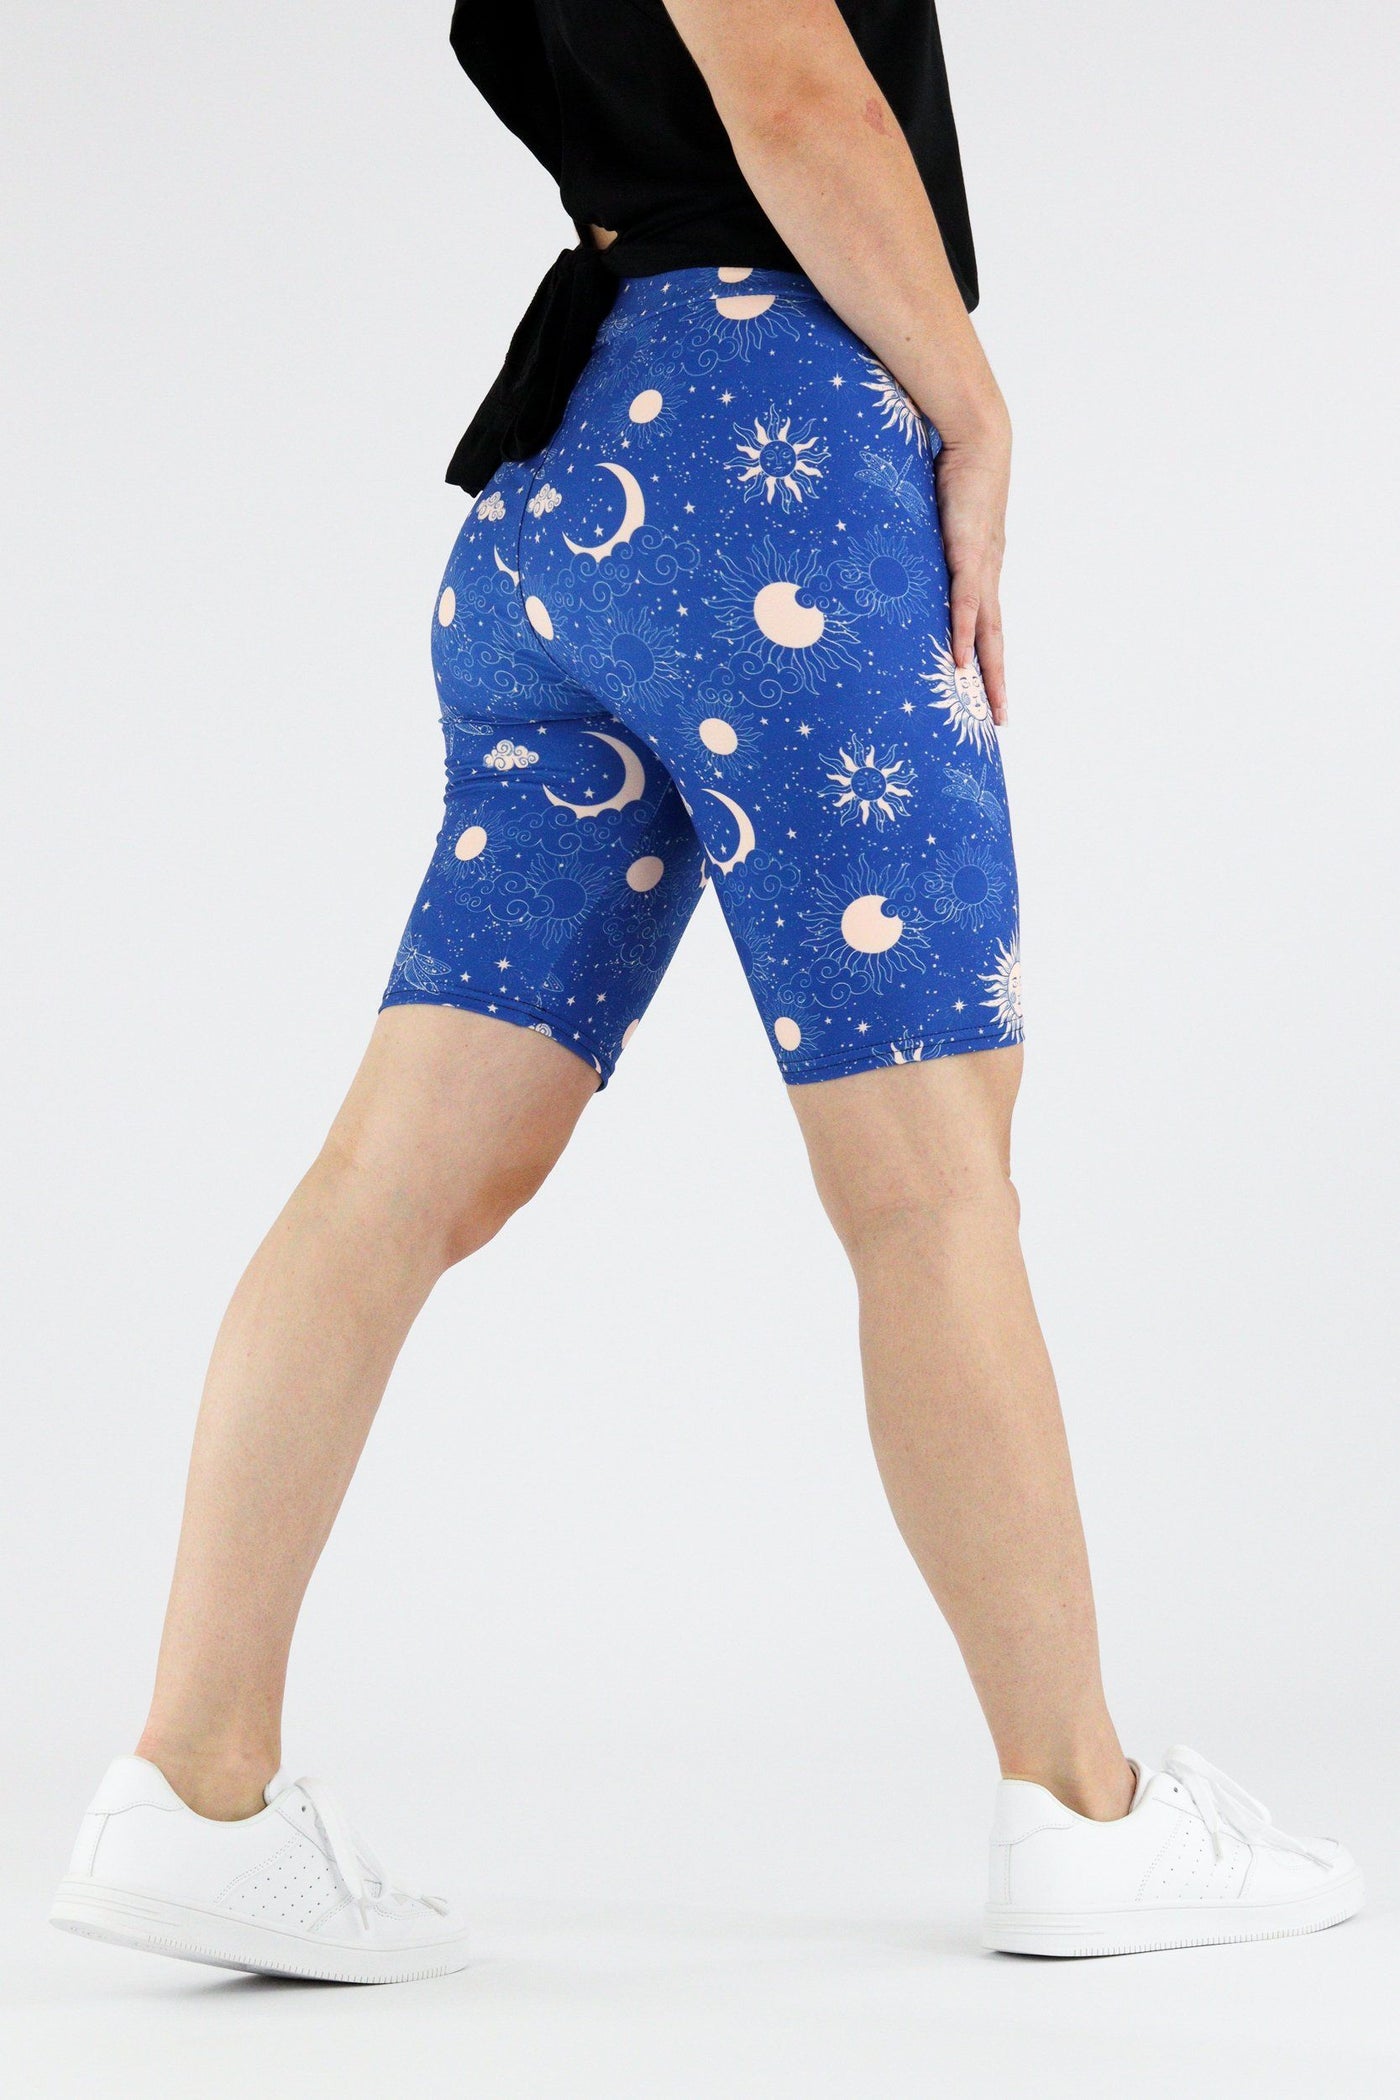 Celestial Rays - Casual Long Shorts Casual Shorts Pawlie   